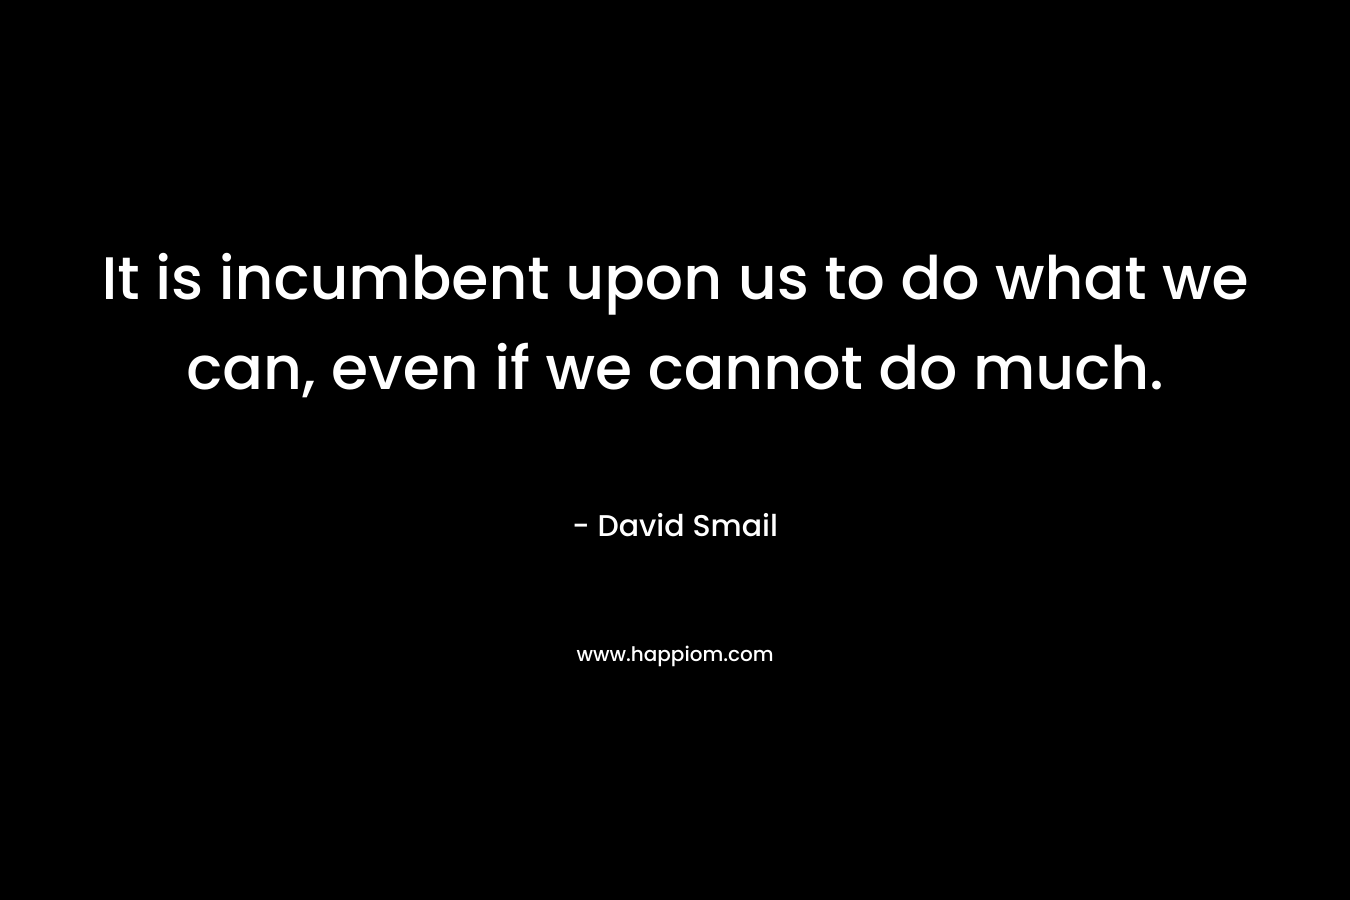 It is incumbent upon us to do what we can, even if we cannot do much.